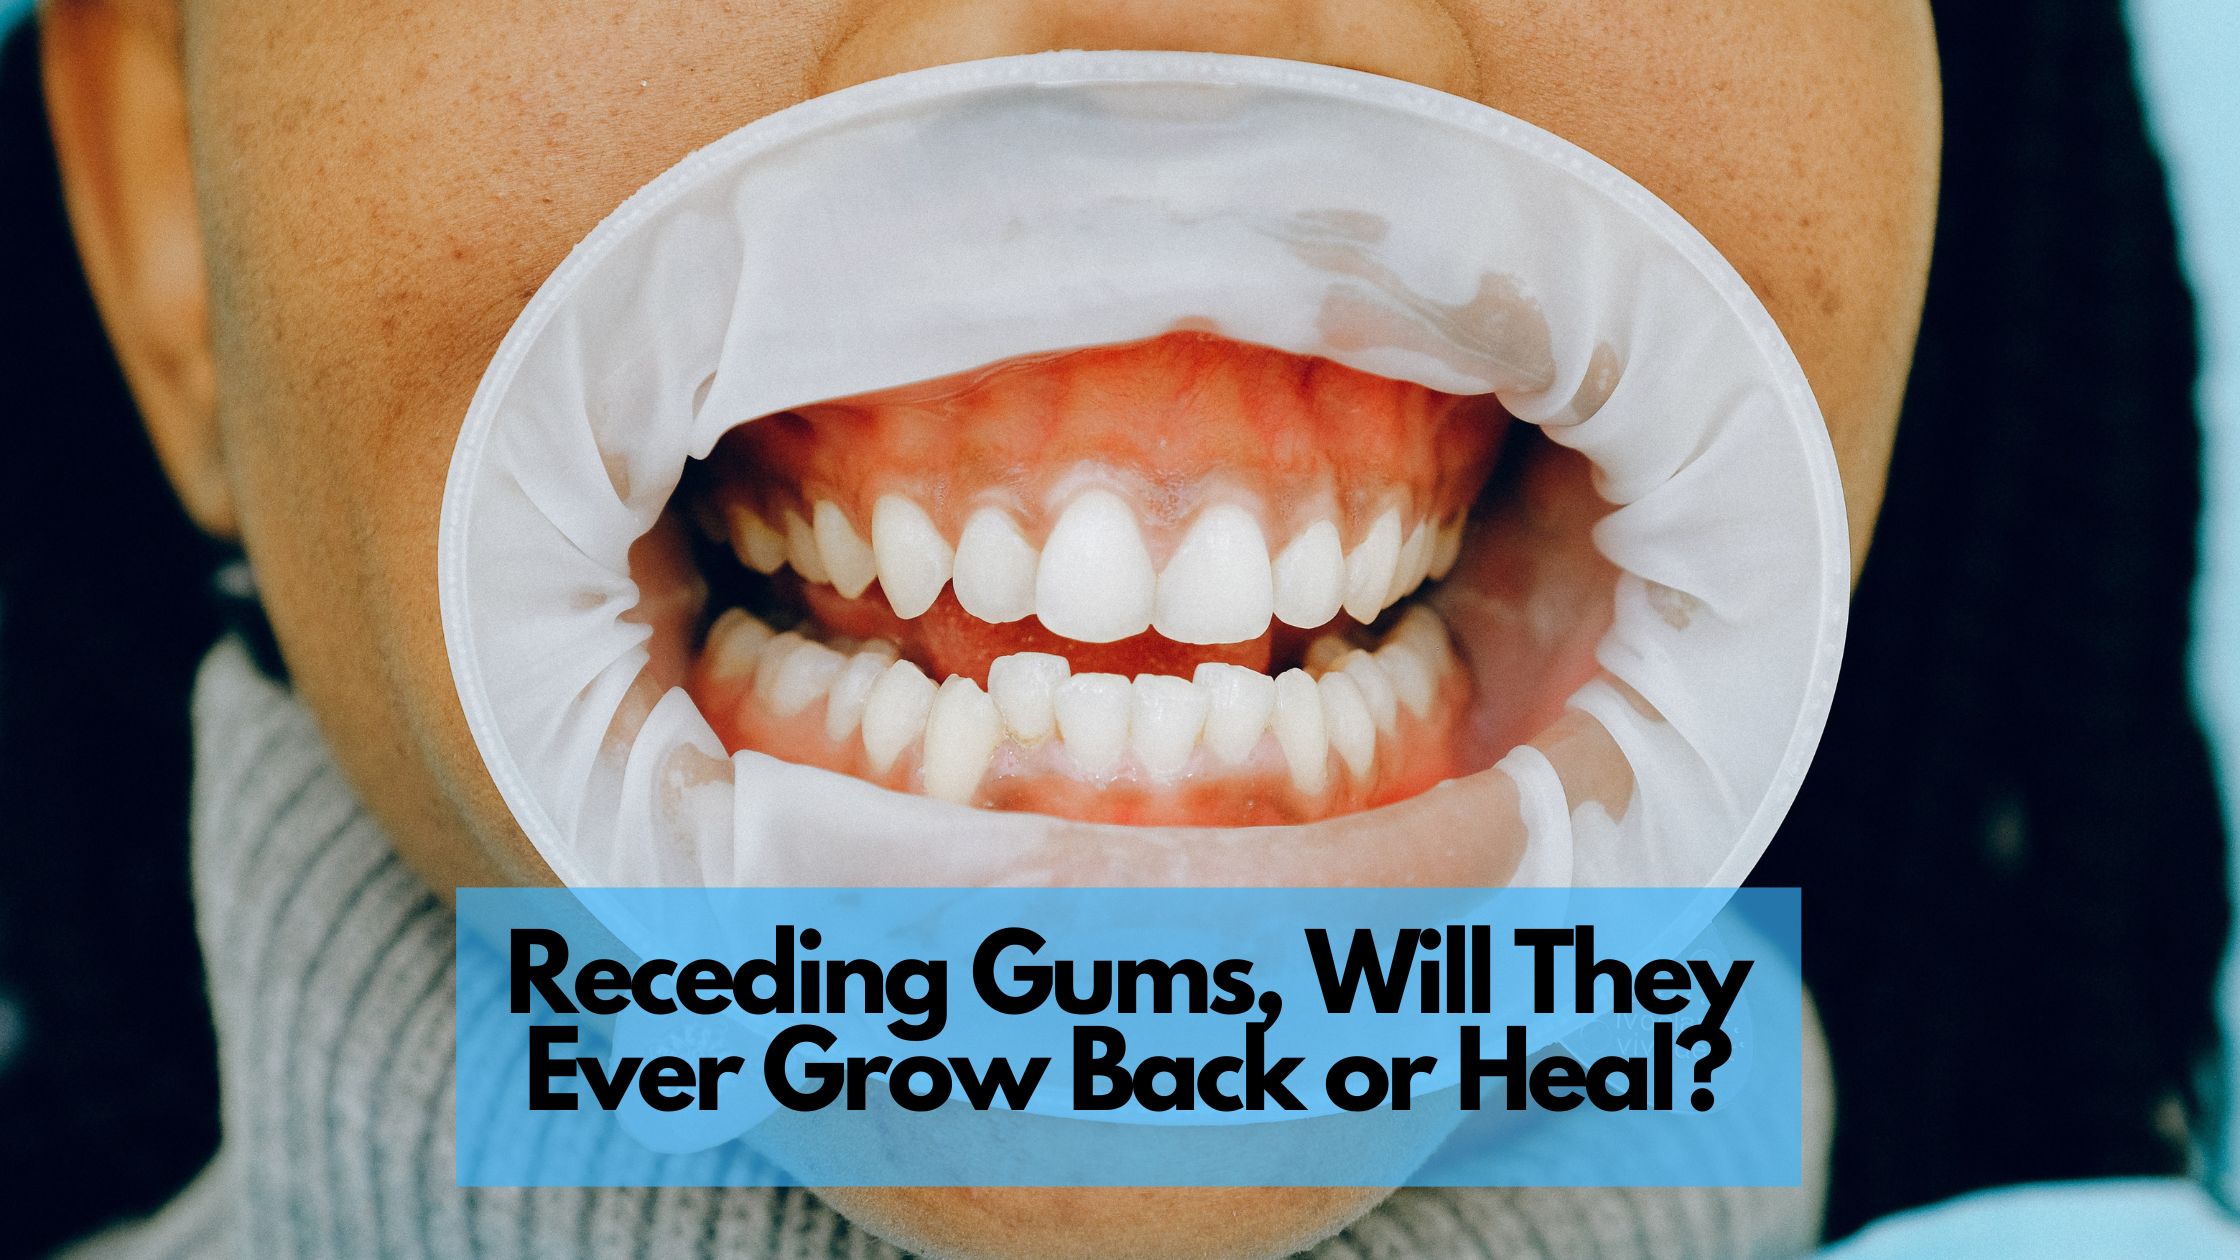 Receding Gums, Will They Ever Grow Back or Heal